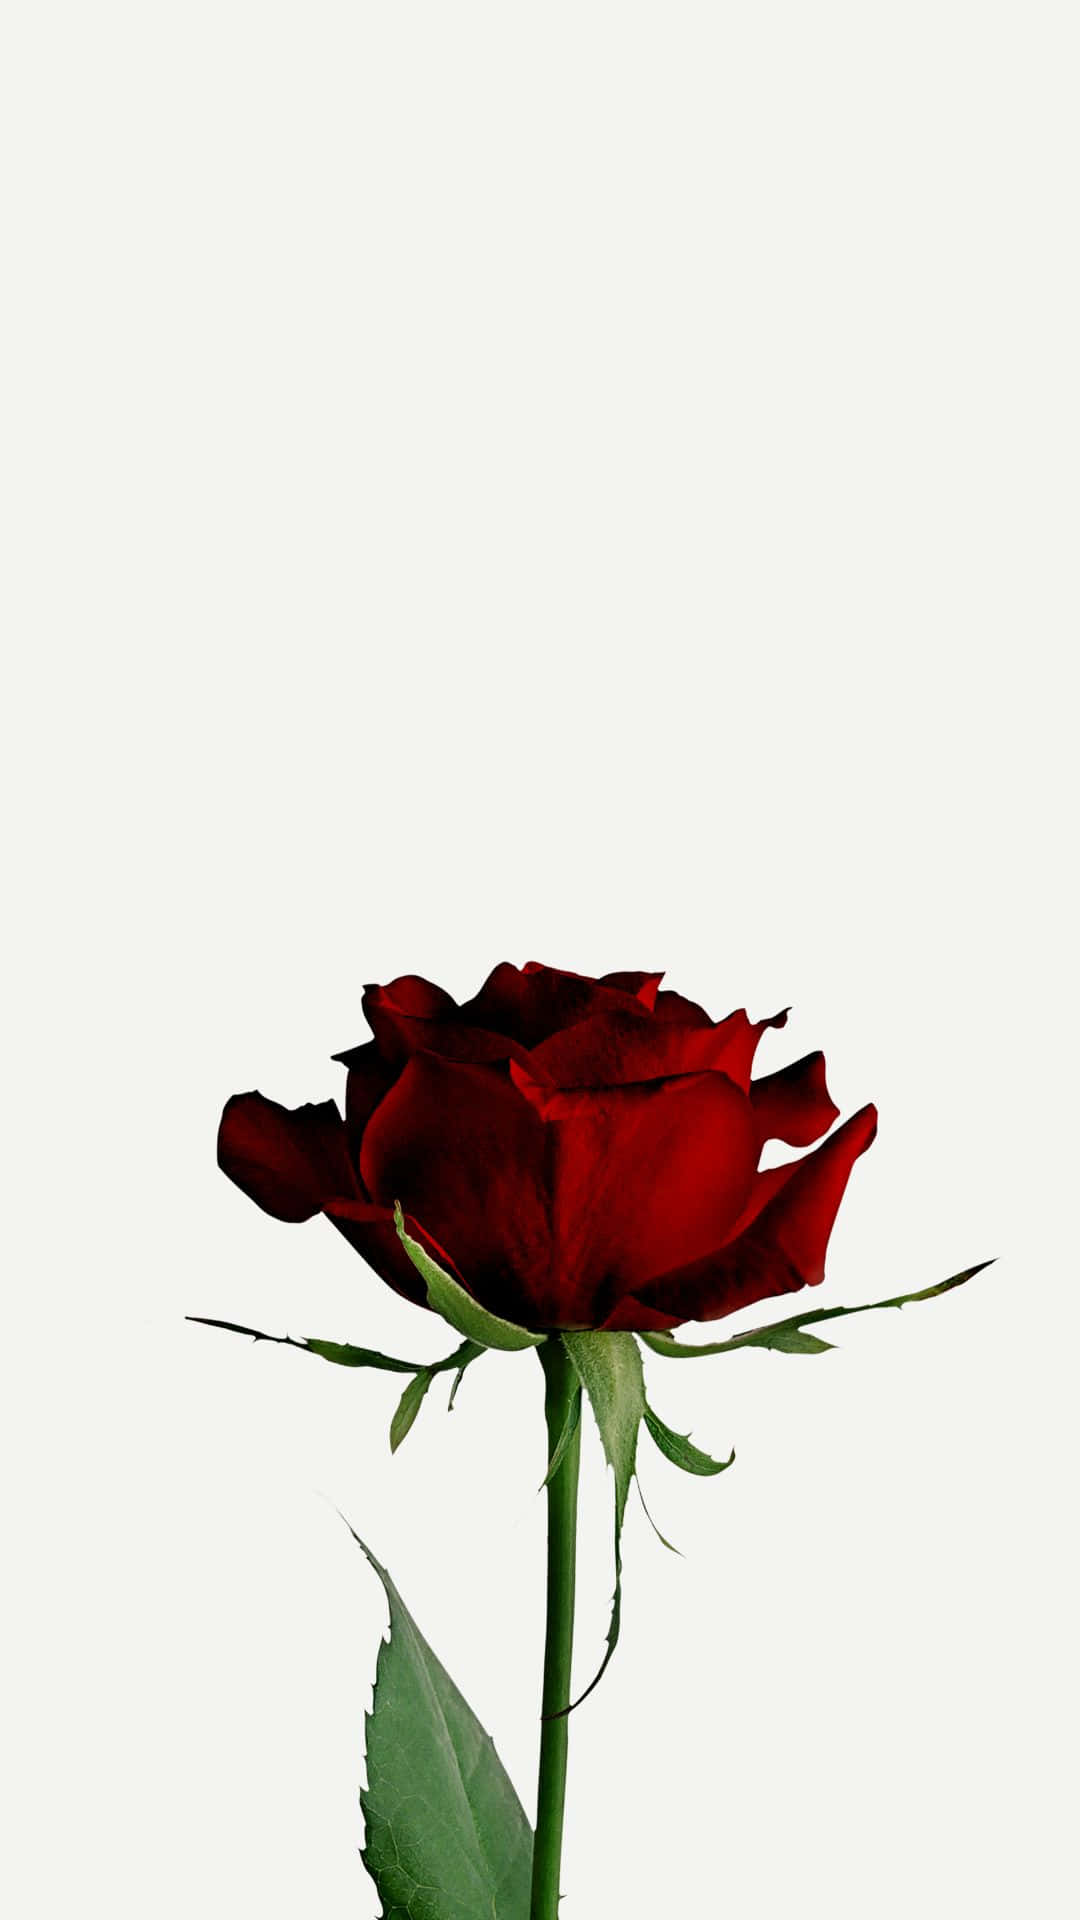 Hd Rose On White Background Wallpaper